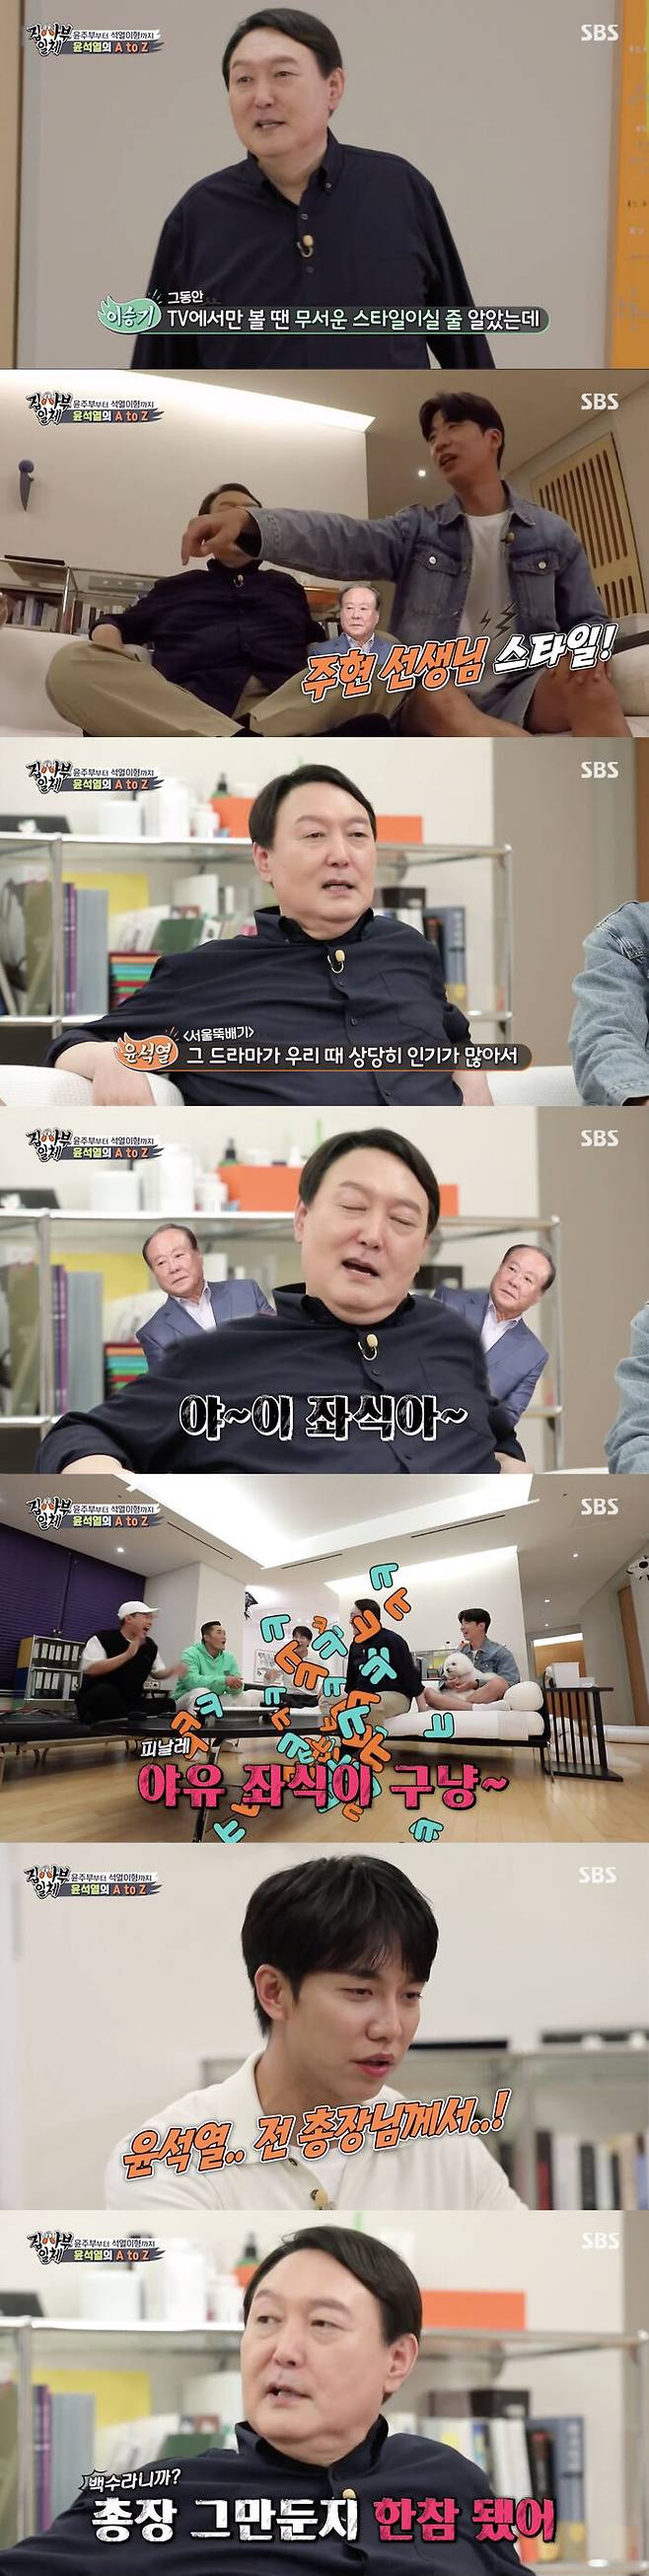 Yoon Seok-ryul reveals Joo Hyun vocal renditionOn SBS All The Butlers broadcast on the 19th, the first episode of the presidential candidate Big3 special feature, Yoon Seok-ryul, was released.Lee Seung-gi was surprised at the fact that he was different from the expectation, saying, I thought it was a scary style when I saw it only on TV, about Yoon Seok-ryul from the prosecution president.Yoo Soo-bin added, It is a little Joo Hyun teacher style.Then, Yoon Seok-ryul said, The drama called Seoul Ttukbaegi, which was once released by Joo Hyun, was quite popular.So at that time, there were no children who could not imitate him. All The Butlers responded greatly to the perfect vocalization of visual and speech.Lee Seung-gi called him the former President, saying, I thought you were serious about the world.Yoon Seok-ryul said, It is a long time since I quit President, I have quit President.Lee Seung-gi said, I could have been a real brother, but now I will be a brother. Yoon Seok-ryul came to me comfortably, saying, Its a victory.He also asked other members to shake hands, saying, My brother has four today.